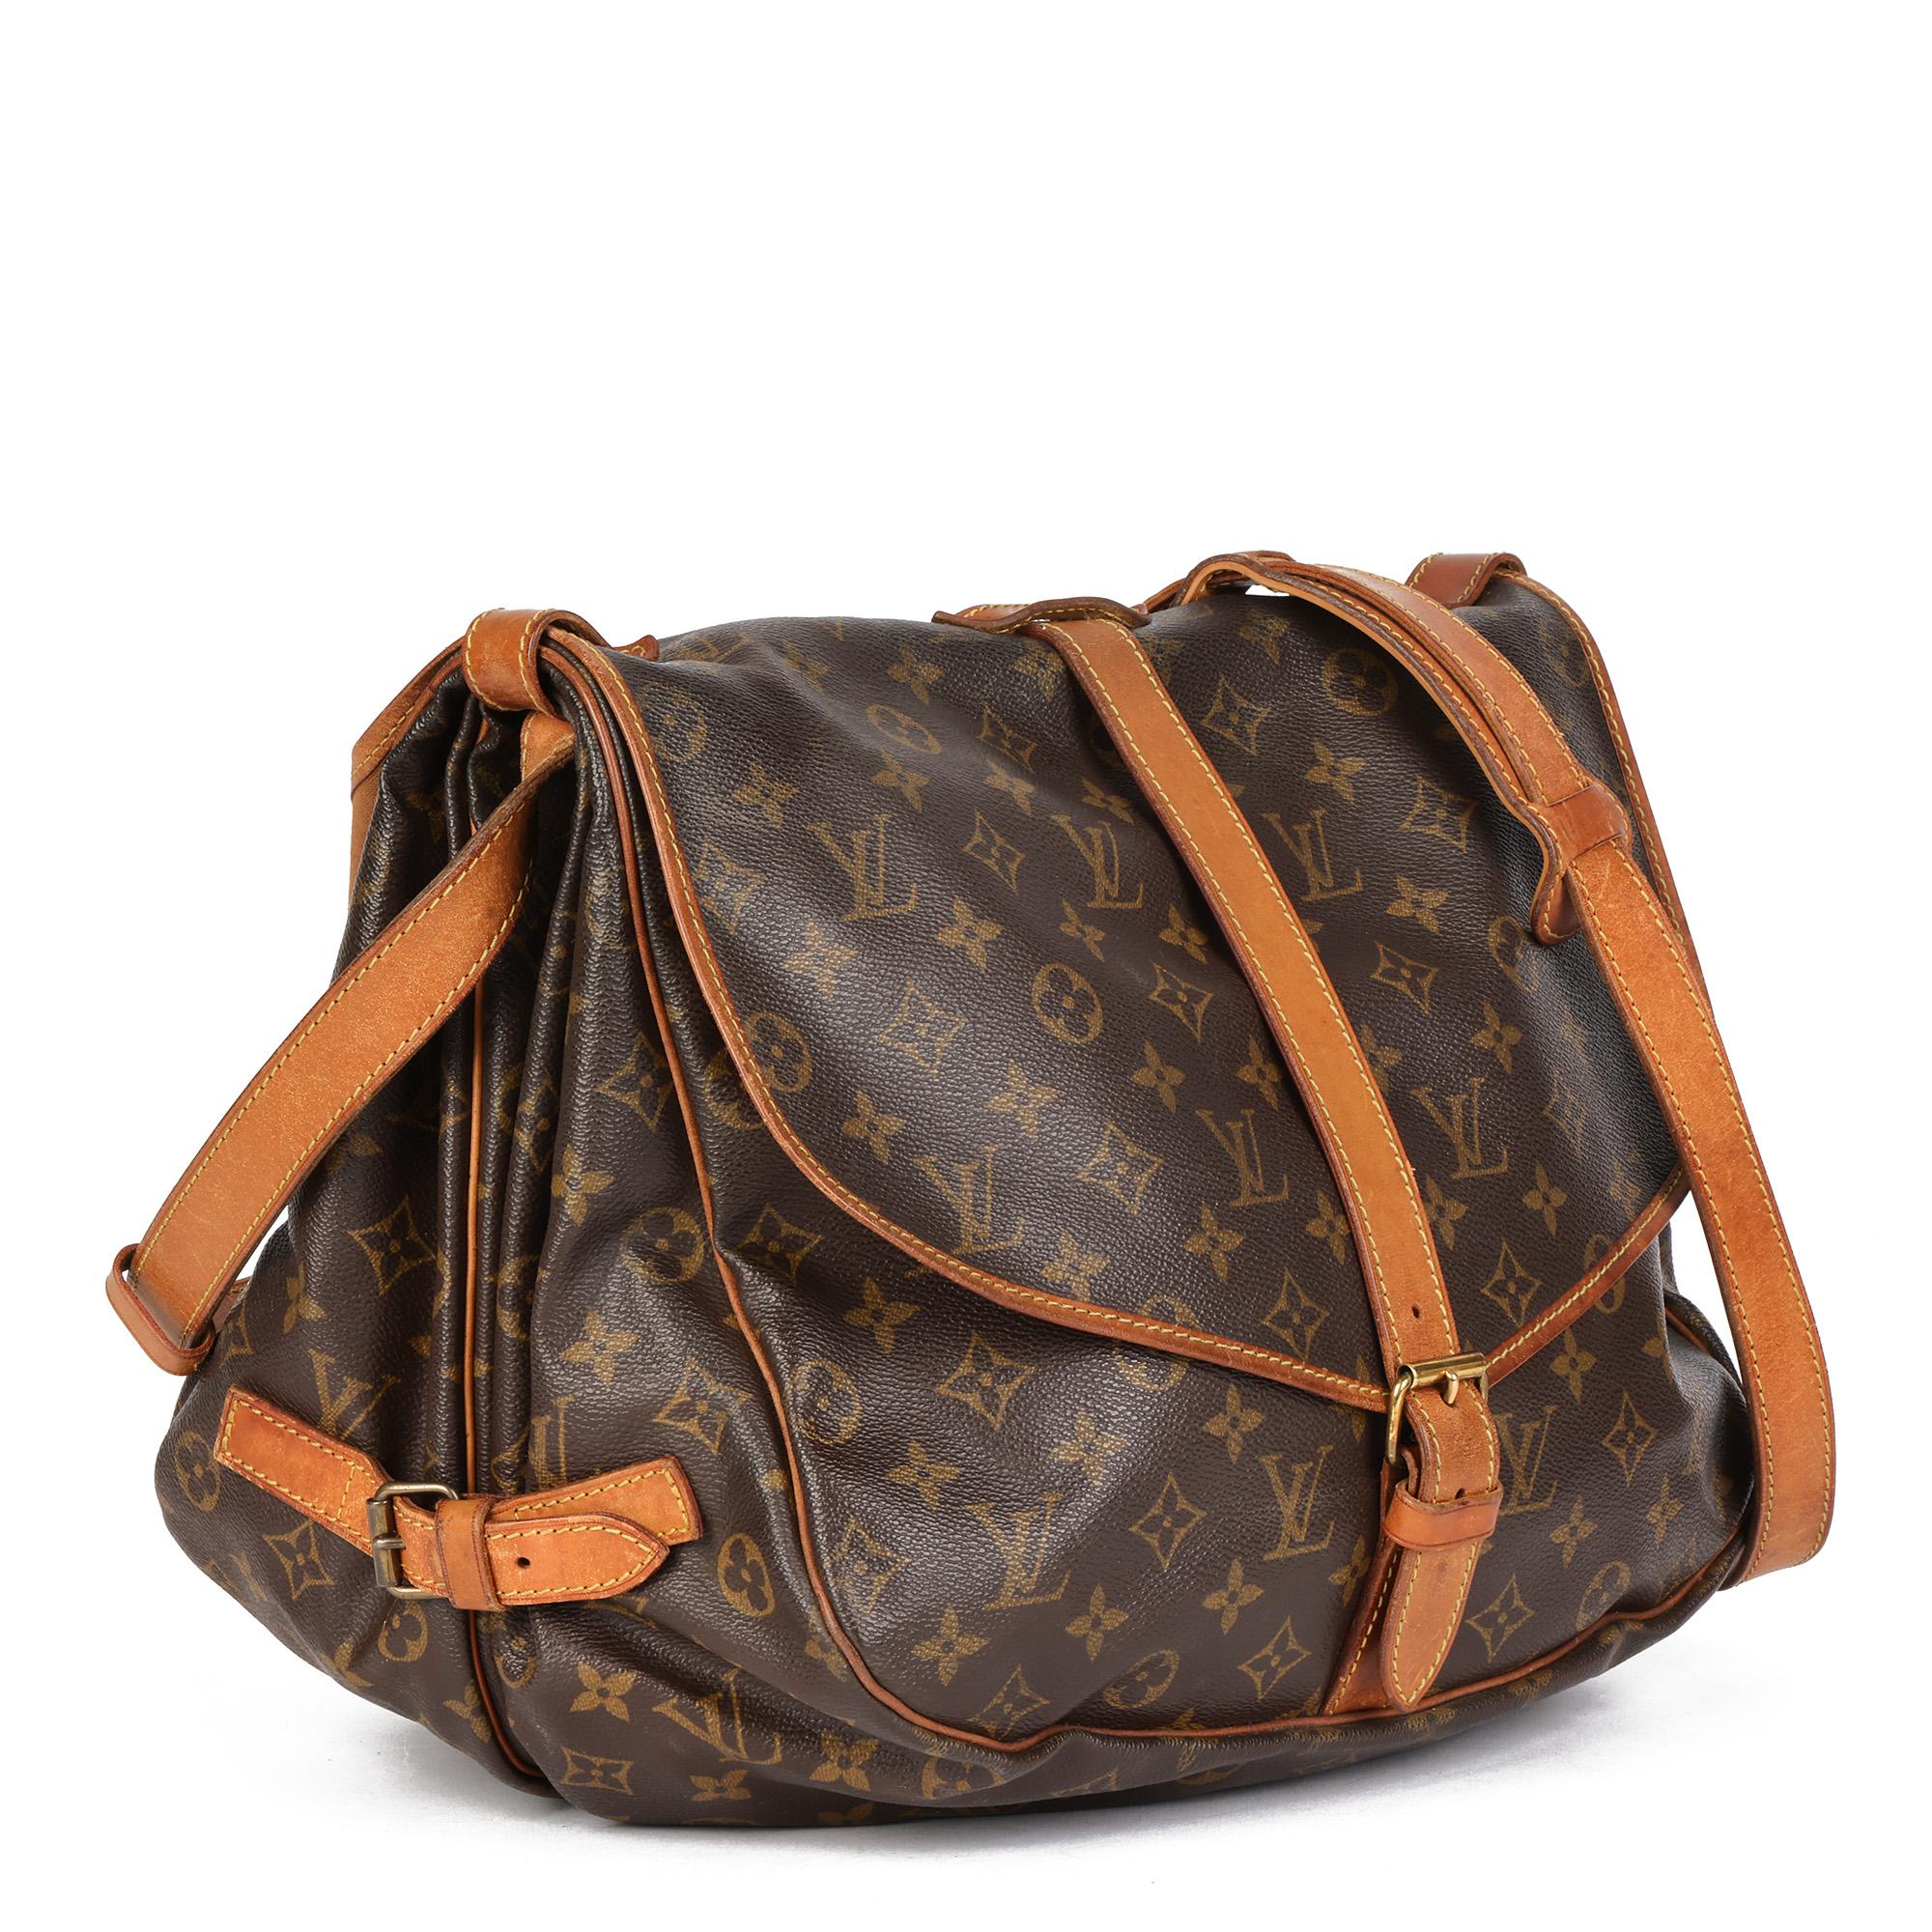 LOUIS VUITTON
Brown Monogram Coated Canvas & Vachetta Leather Vintage Saumur 35

Xupes Reference: CB626
Serial Number: VI8907
Age (Circa): 1997
Authenticity Details: Date Stamp (Made in France)
Gender: Unisex
Type: Crossbody, Shoulder

Colour: